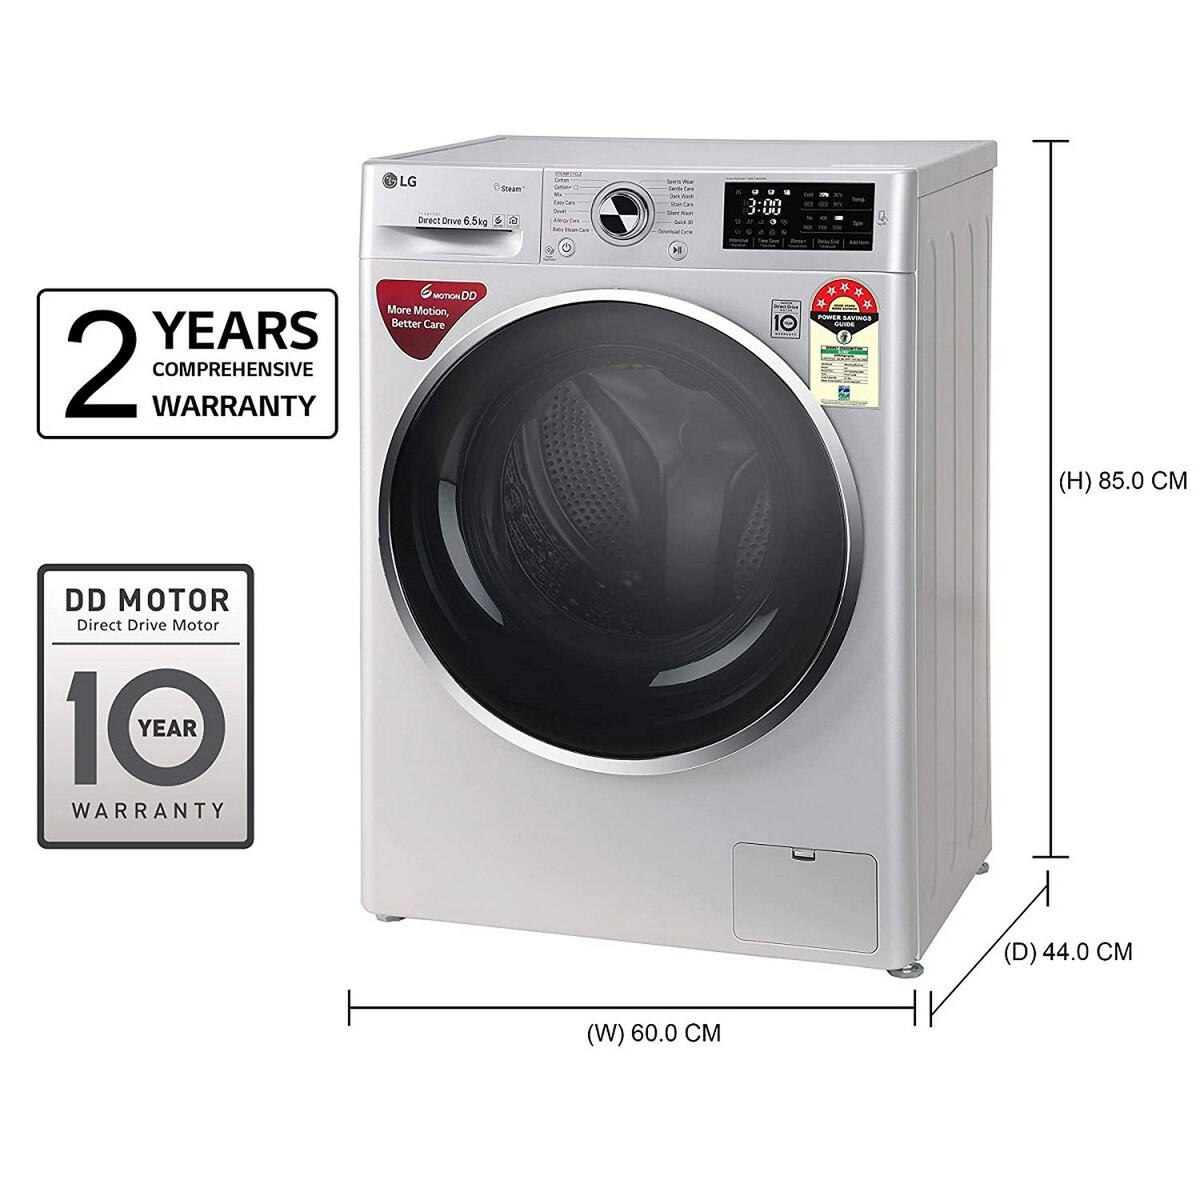 LG Fully Automatic Front Load Washing Machine FHT1265ZNL 6.5 Kg 5*